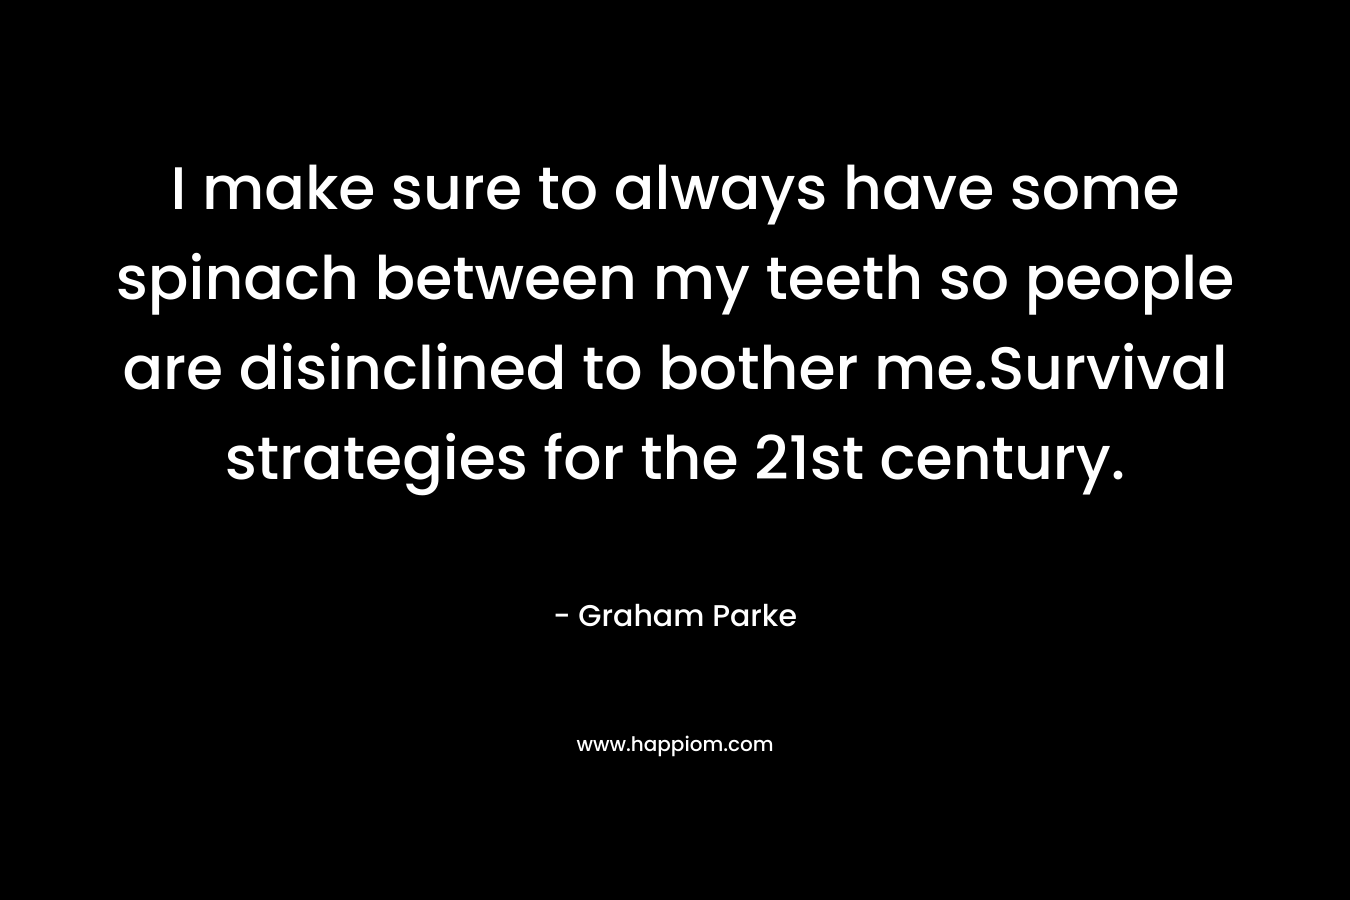 I make sure to always have some spinach between my teeth so people are disinclined to bother me.Survival strategies for the 21st century.